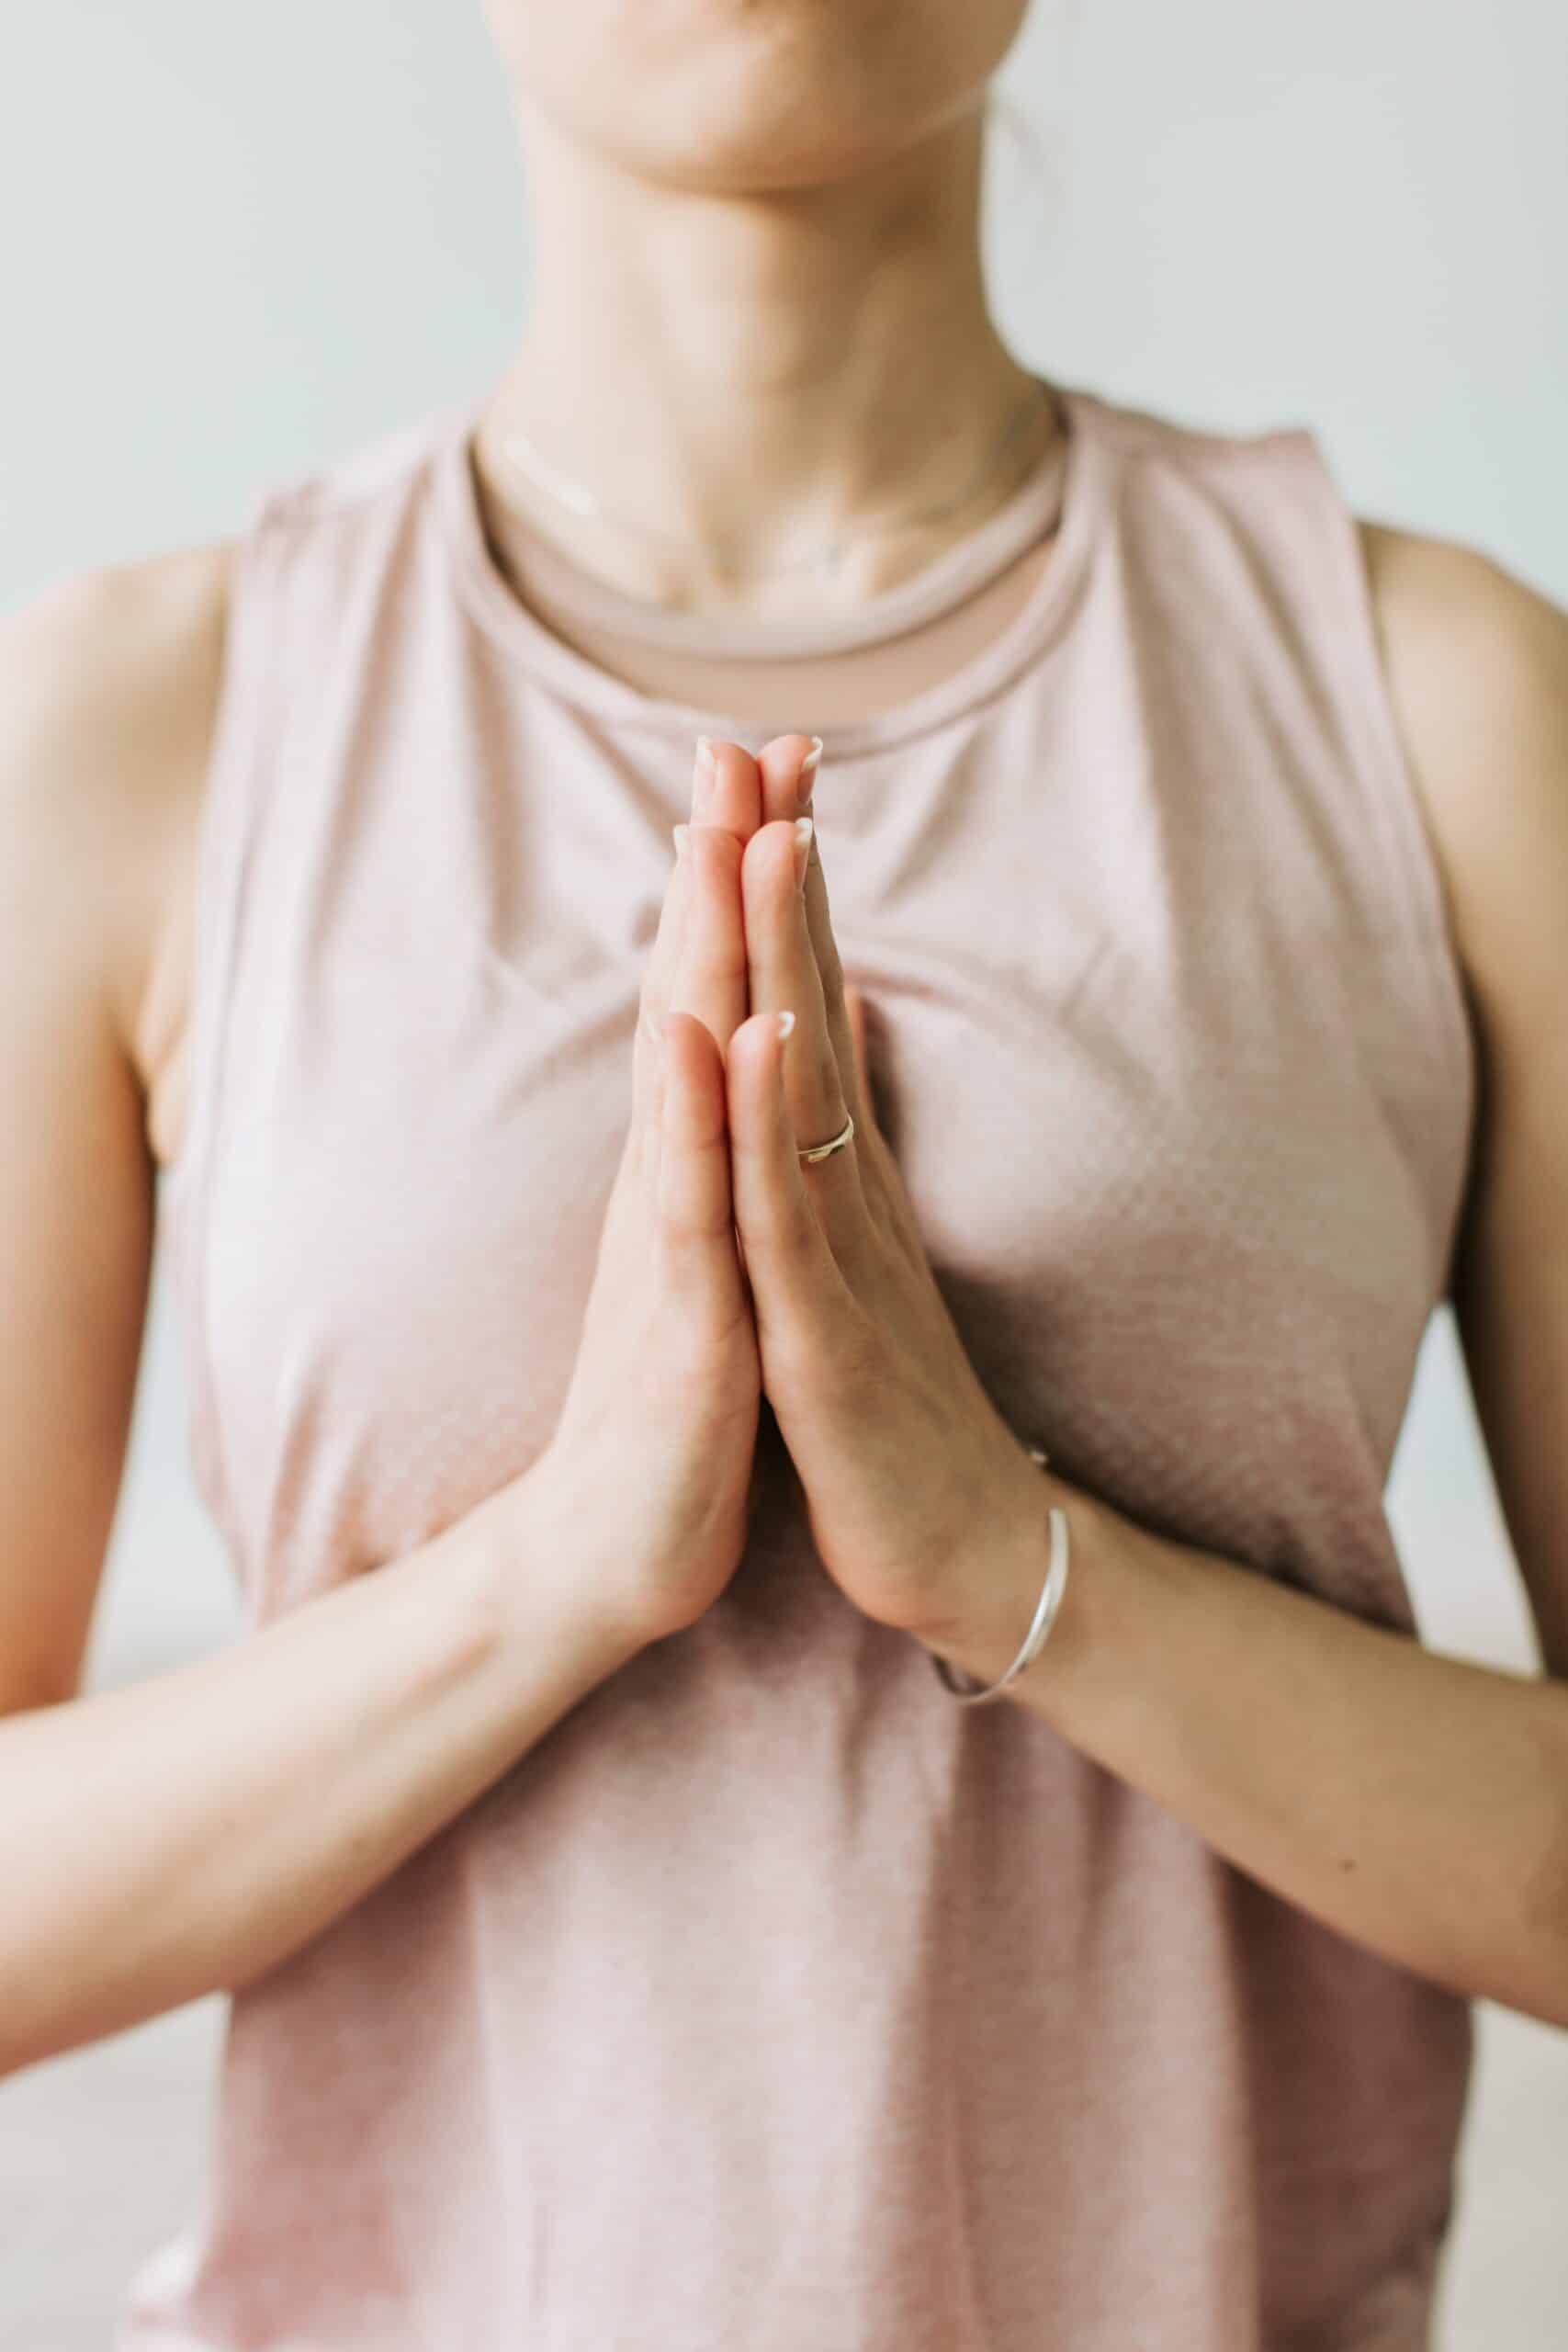 Anjali mudra: This mudra is used to express salutation, respect, and devotion. It is formed by bringing the palms together in front of the chest.